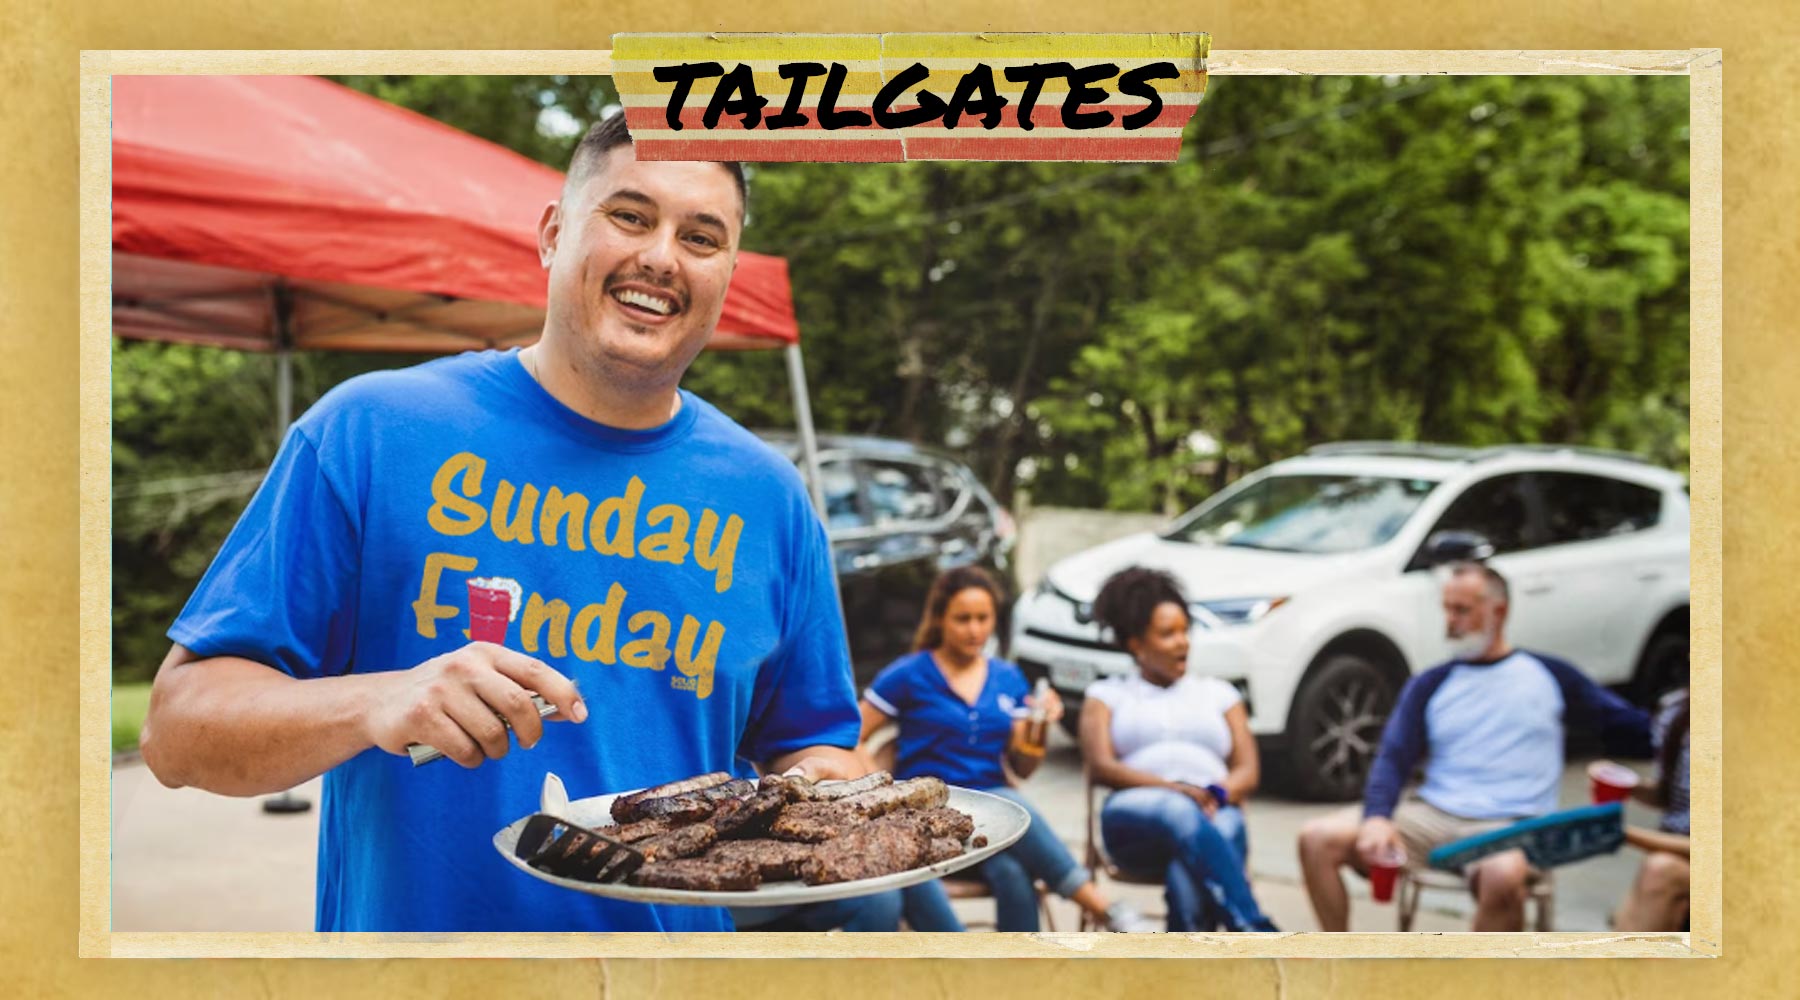 Cool Tailgating T-shirts | Vintage Sports Graphic Tees